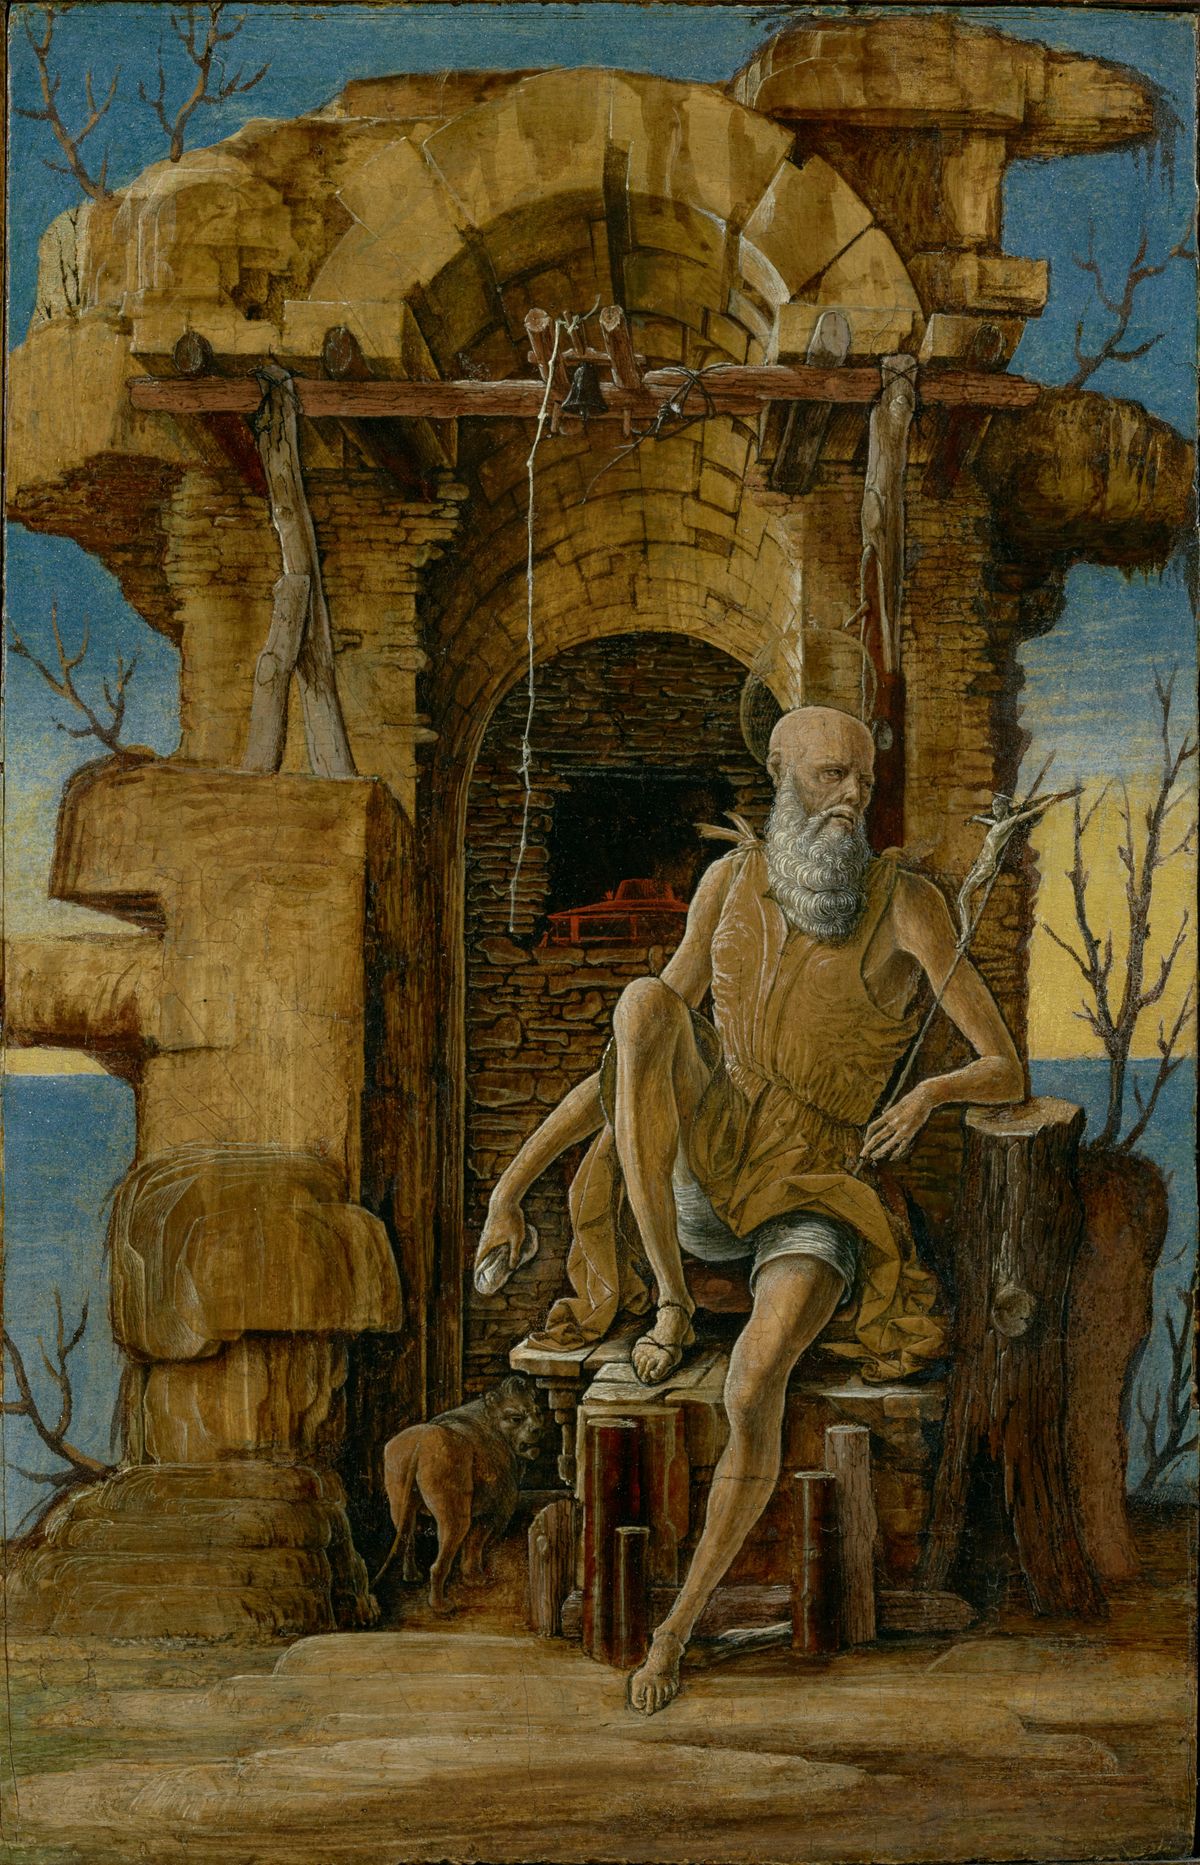 Saint Jerome in the Wilderness by Ercole de' Roberti (about 1475) - Public Domain Catholic Painting